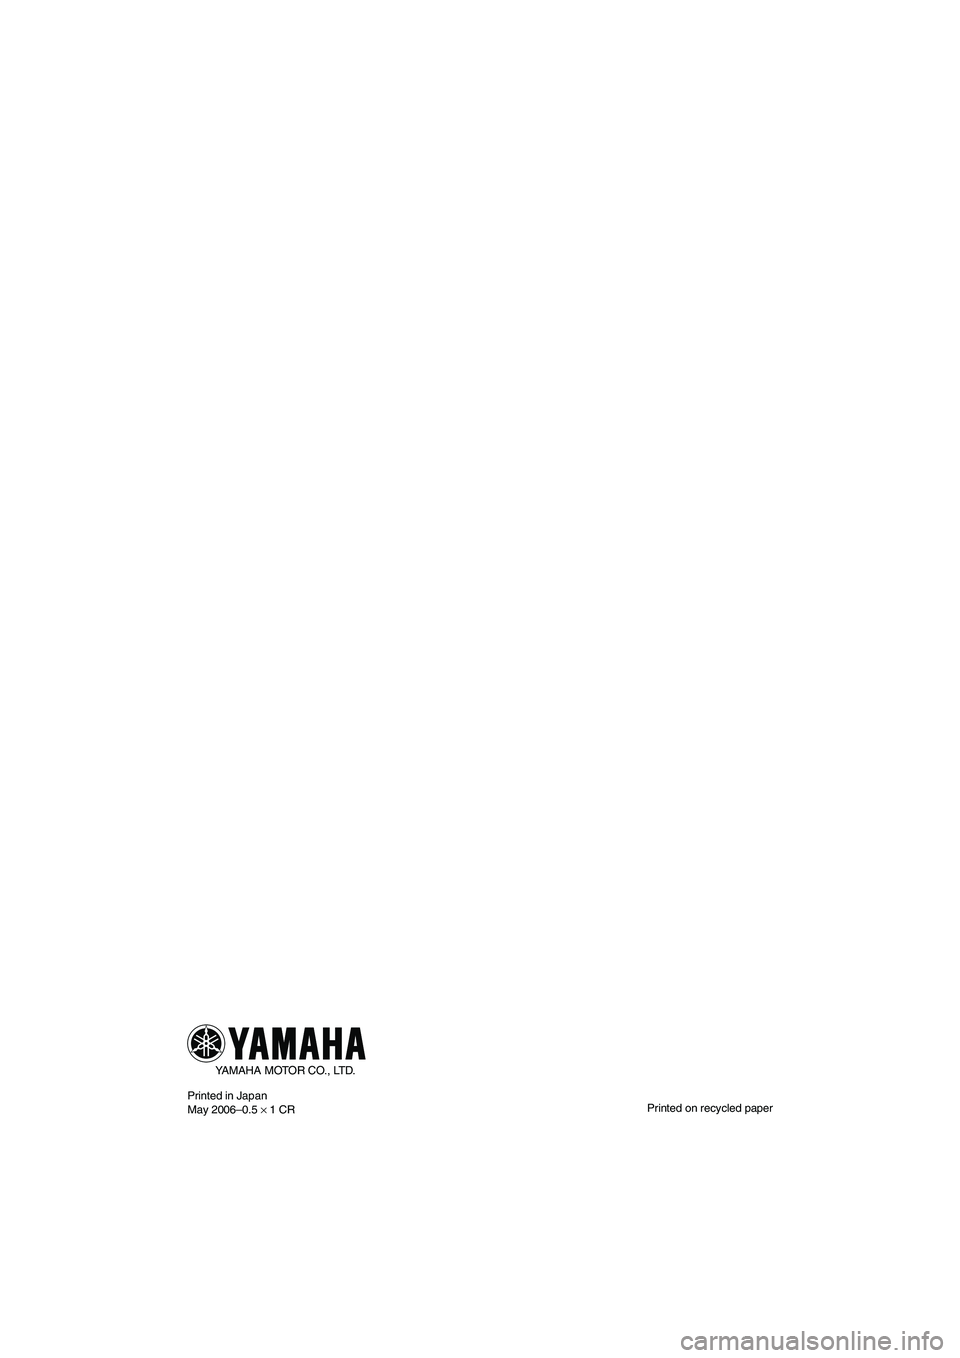 YAMAHA SUPERJET 2007 Manual PDF YAMAHA MOTOR CO., LTD.
Printed on recycled paper Printed in Japan
May 2006–0.5 × 1 CR
UF1N75E0.book  Page 1  Tuesday, May 16, 2006  9:53 AM 